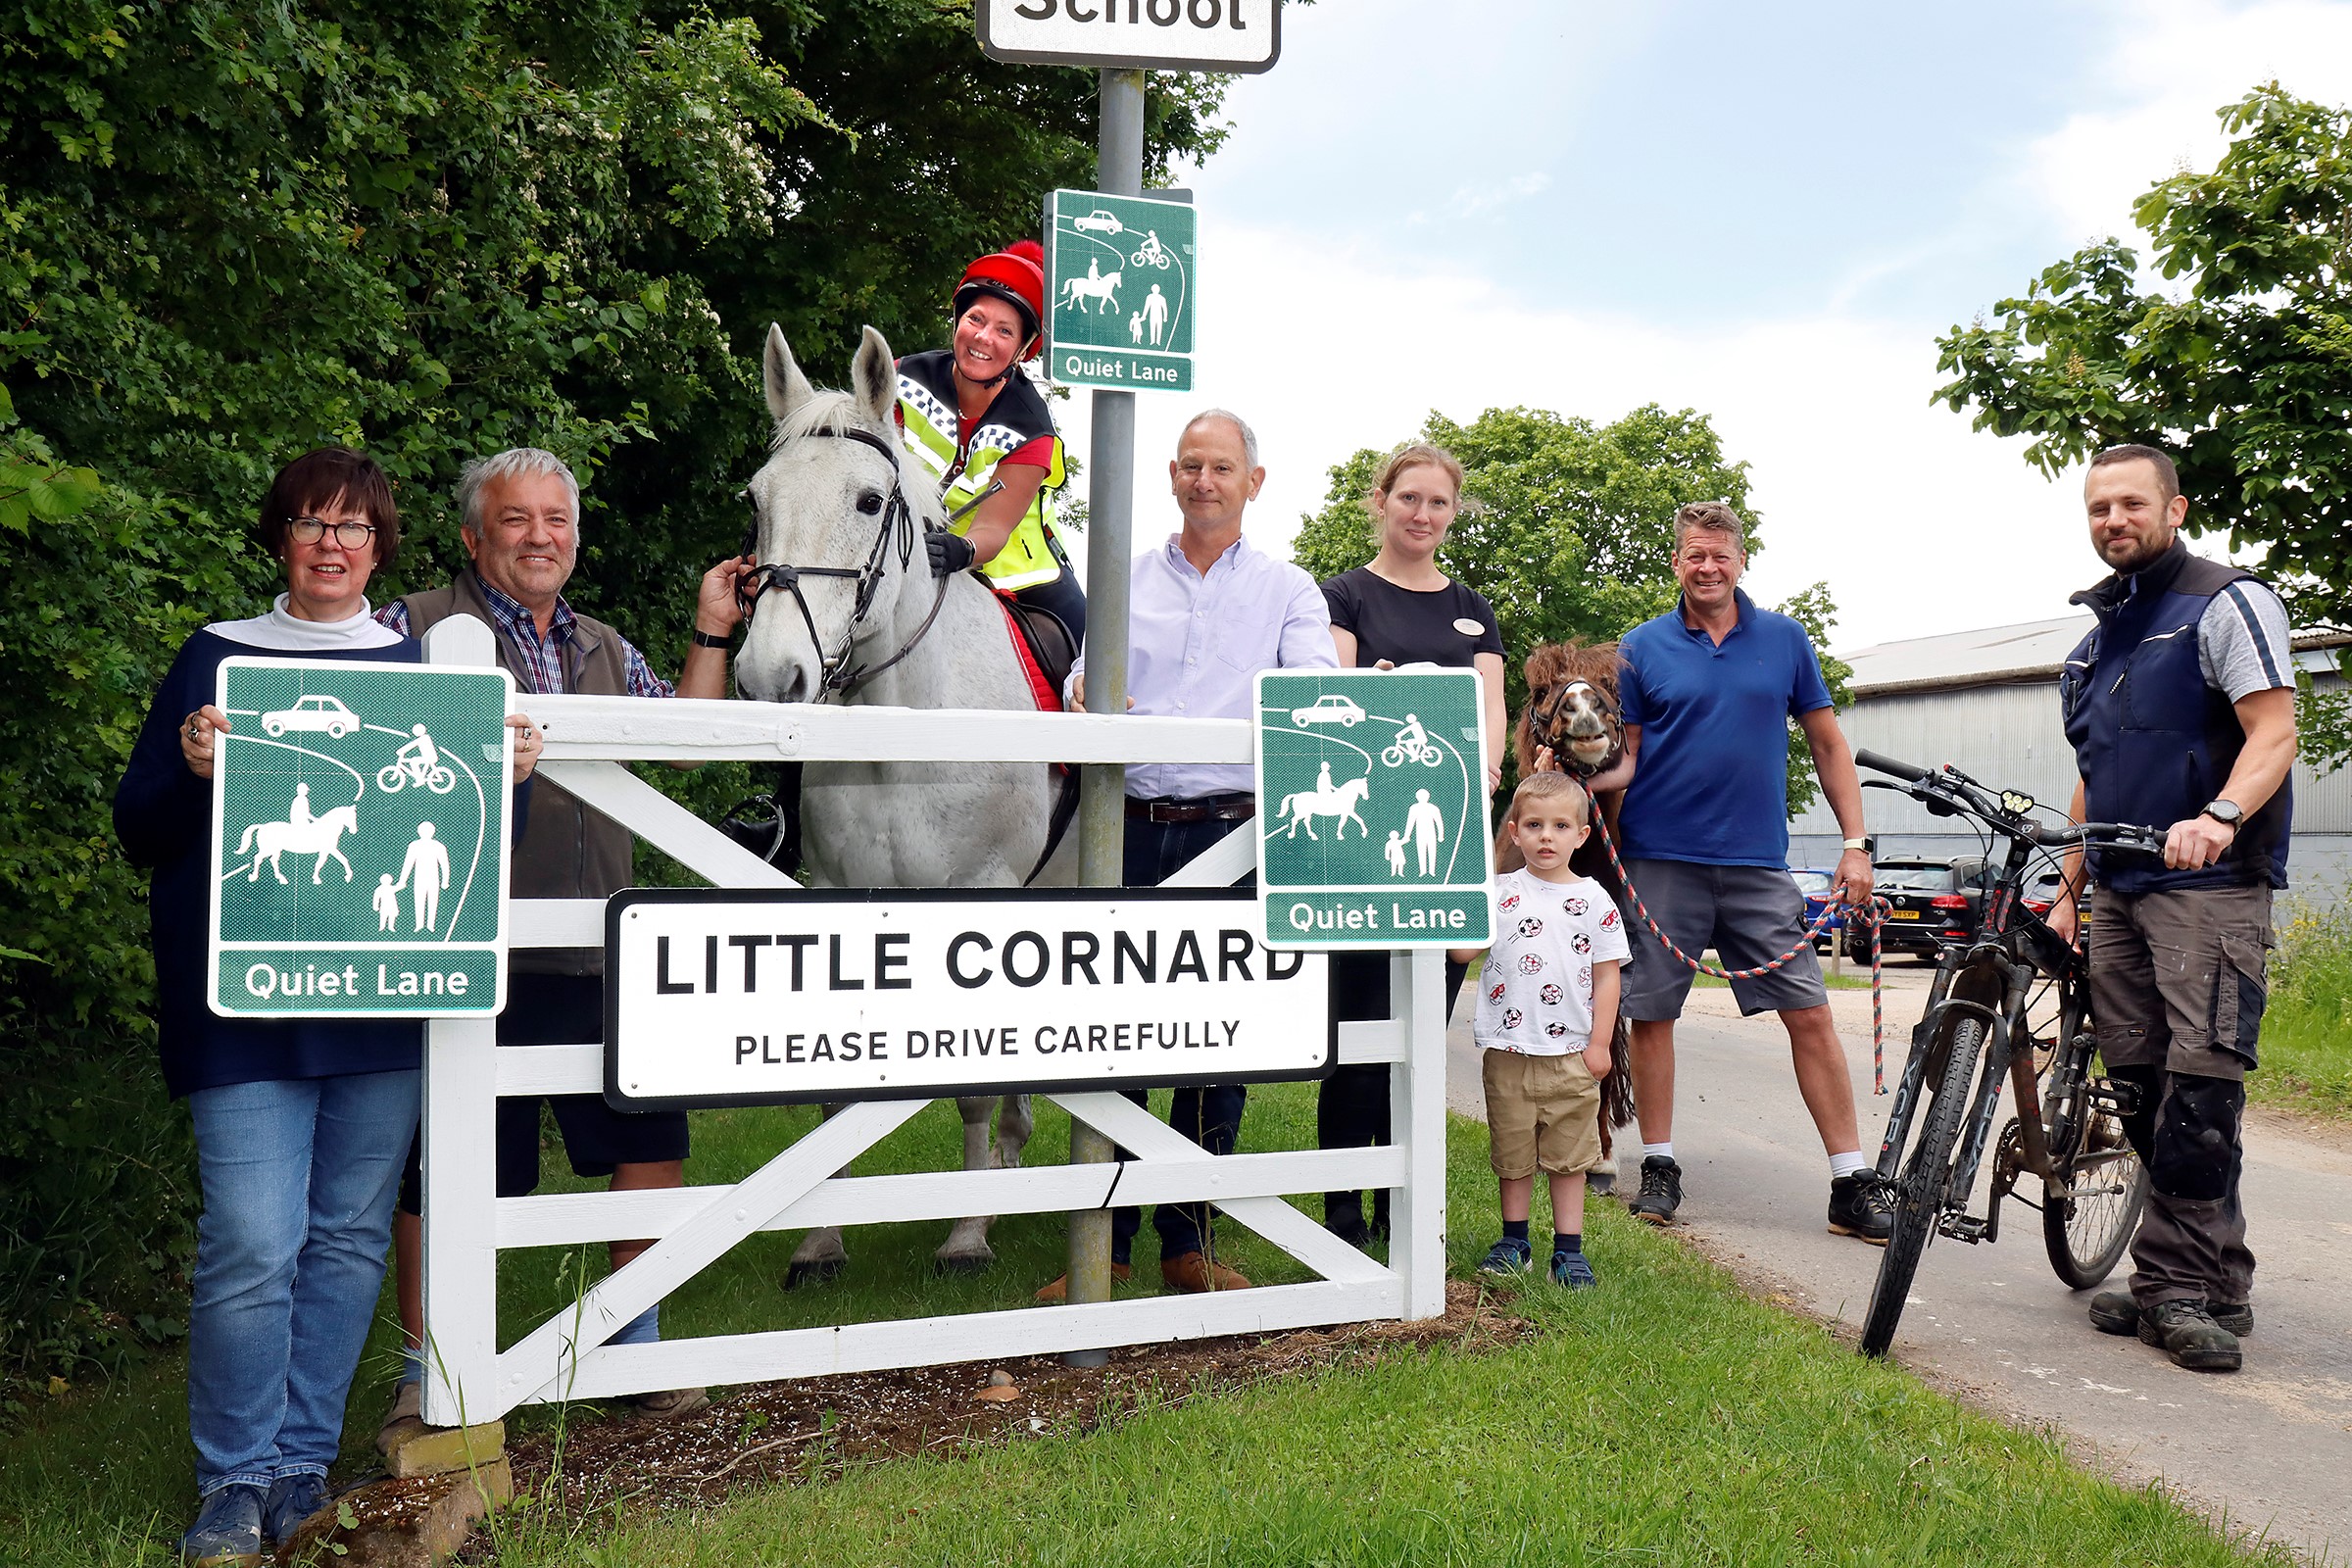 A photo of people at the entrance to Little Cornard, holding quiet lane signs. Ruth Adams and Clive Johnson of Little Cornard Parish Council, Andrea Last of Dorking Tye on Greyness, Mark Irwin, Little Cornard councillor, Charlotte Bradshaw of Yorley Barn Nursery and her son Jake, Mark Rendall holding The Commander, and local farmer James Johnson. (Picture: Paul Nixon, Paul Nixon Photography)